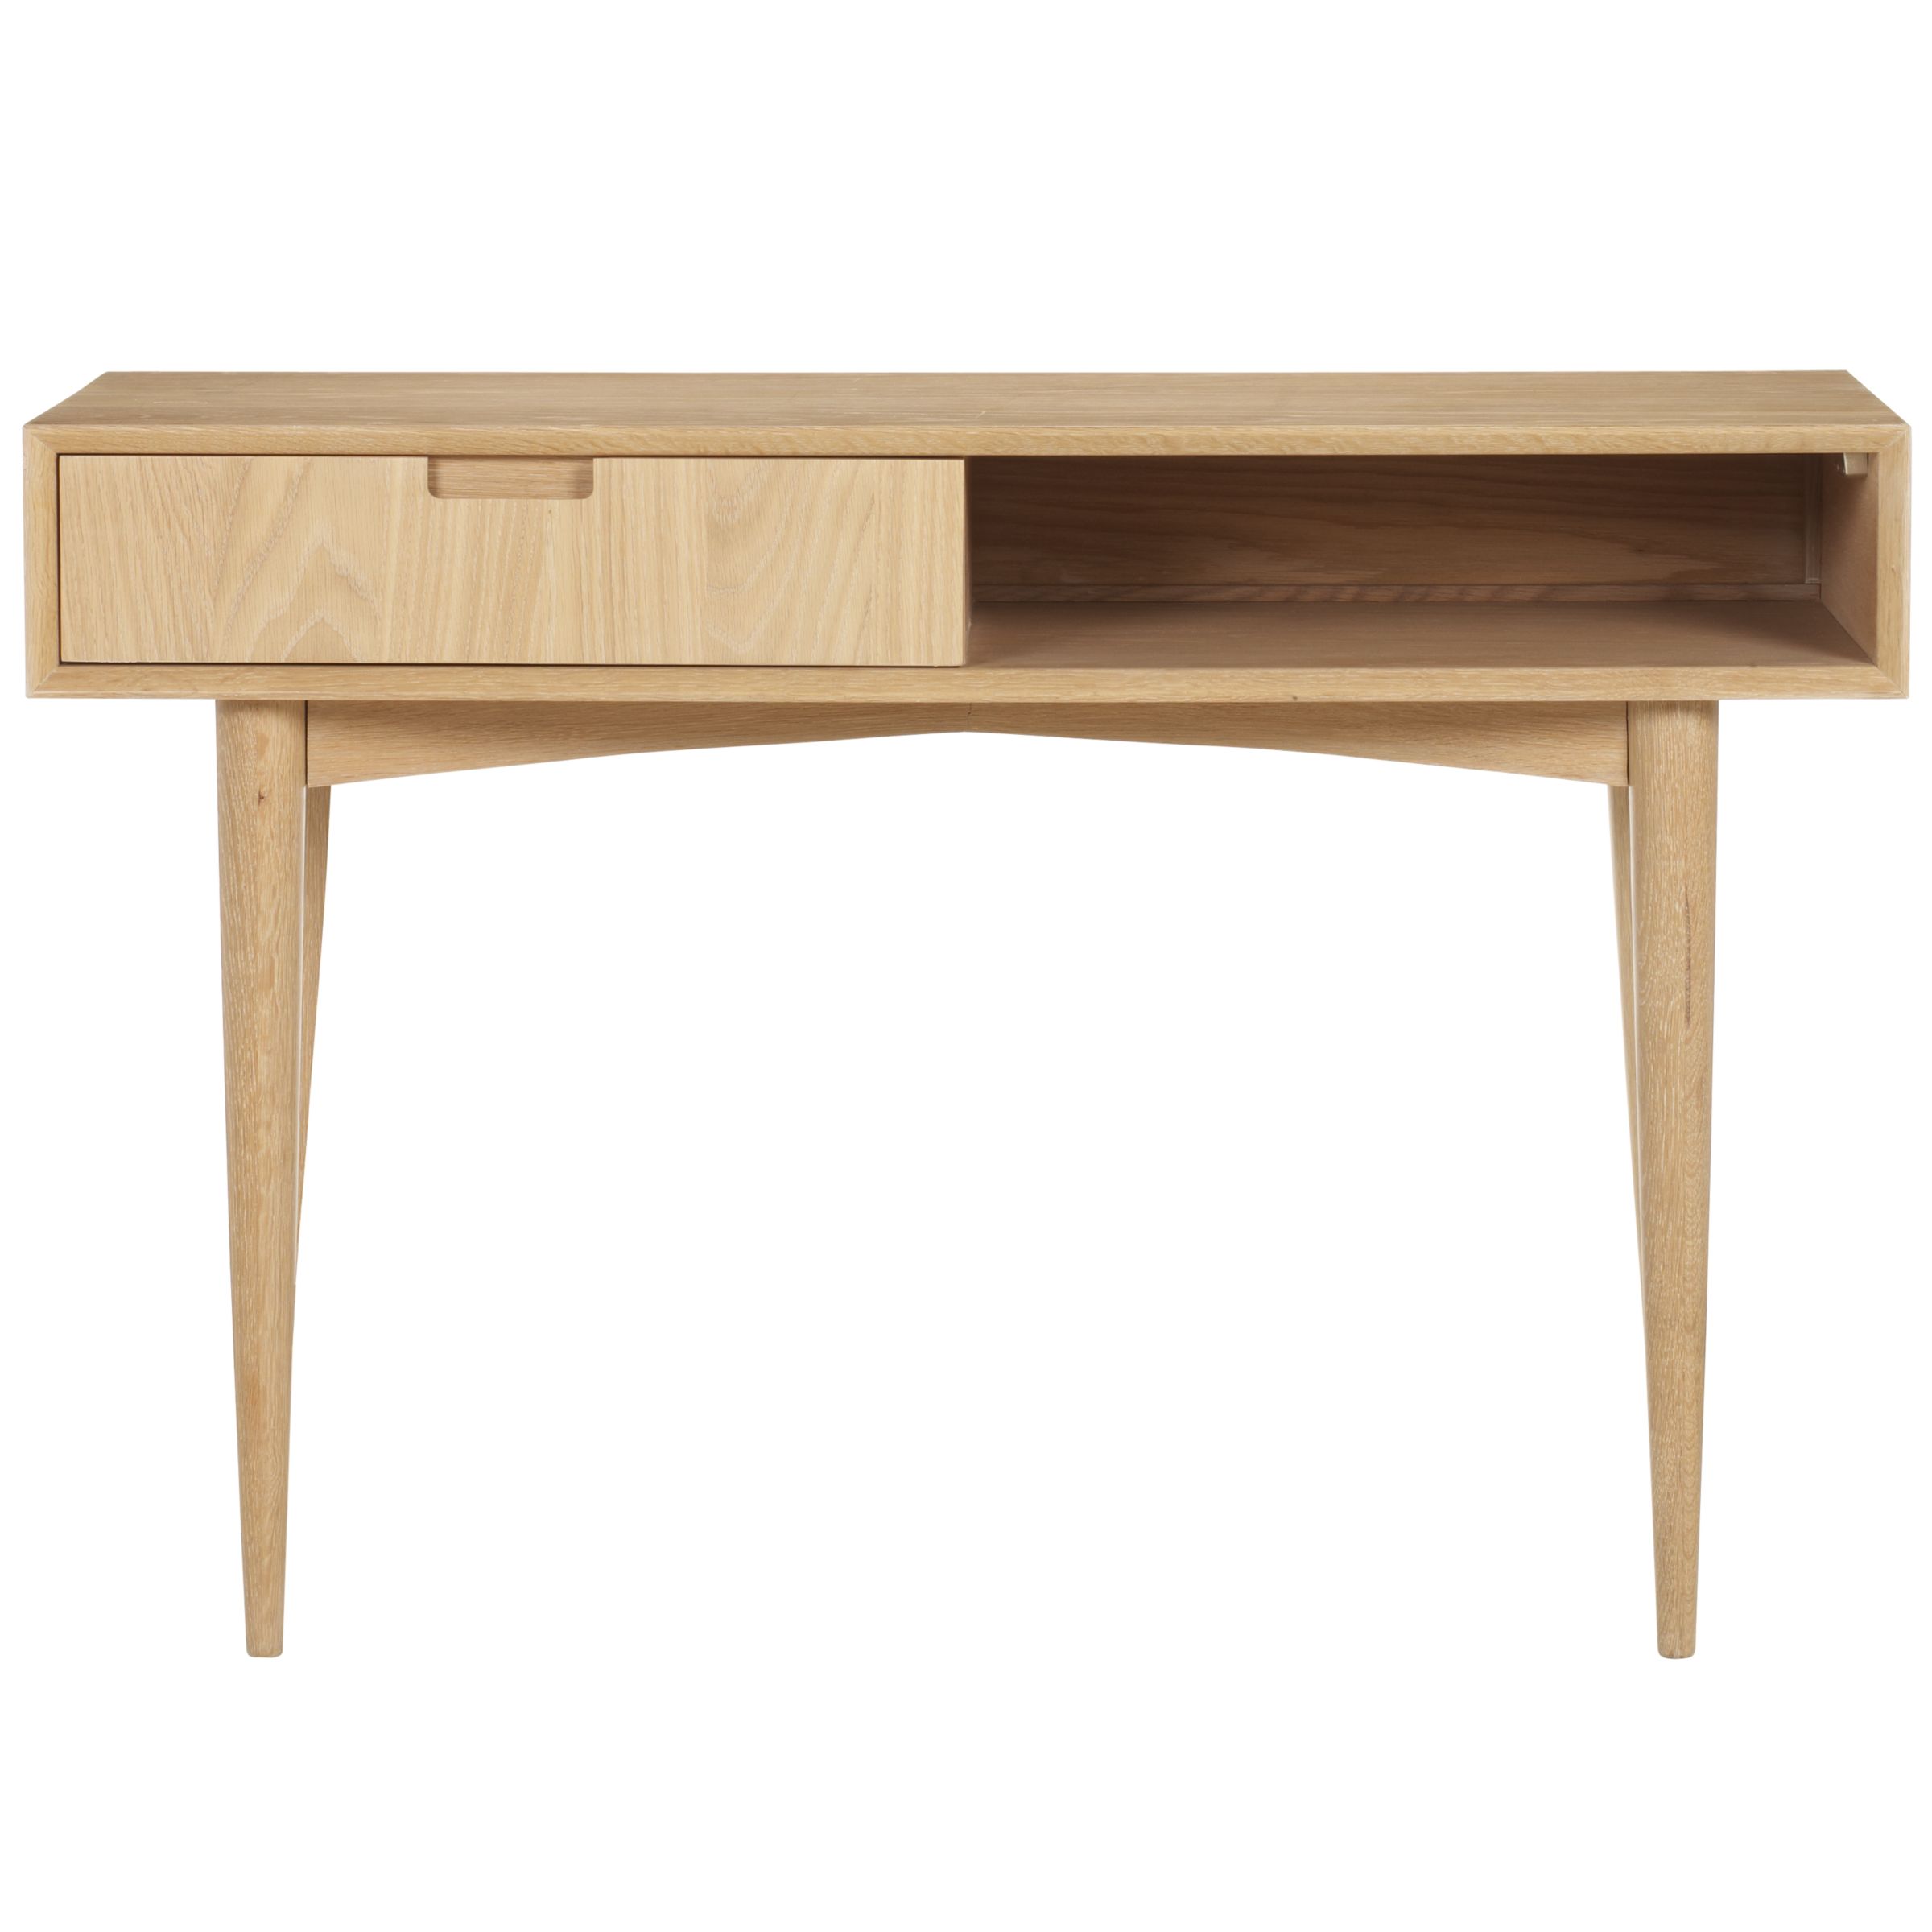 John Lewis Revival Console Table at John Lewis